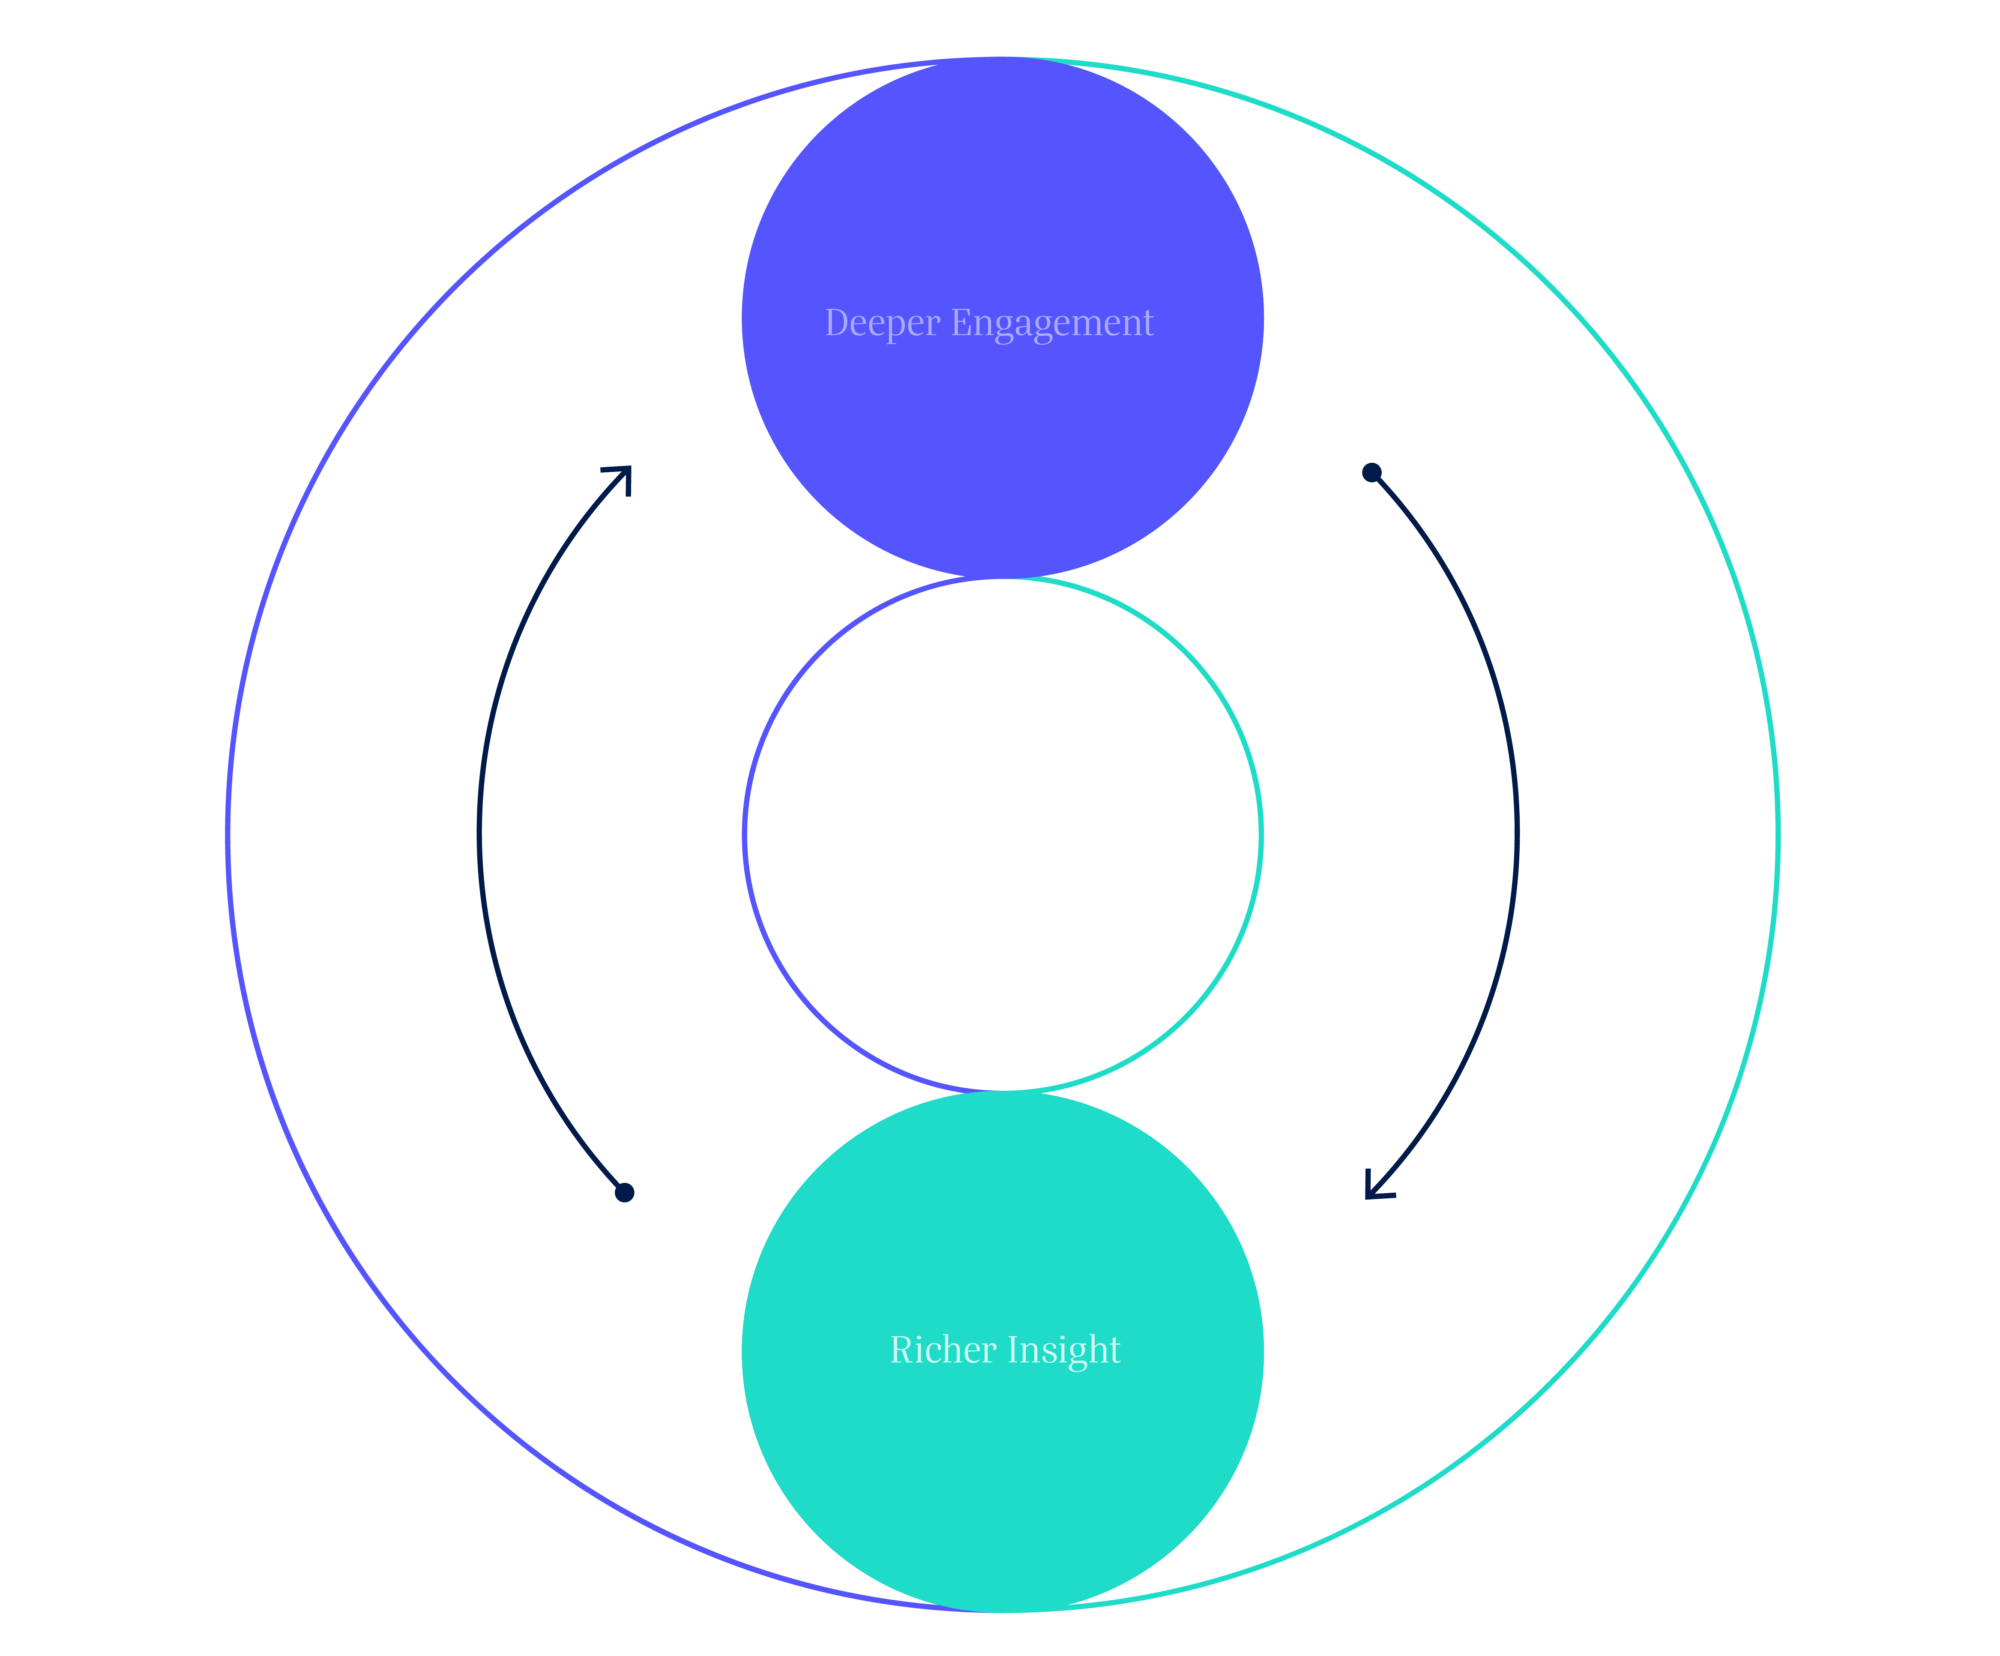 content activation strategy a large circle filled with two smaller filled in circled with arrows connecting them that say Deeper Engagement and Richer Insights, with an empty circle between them